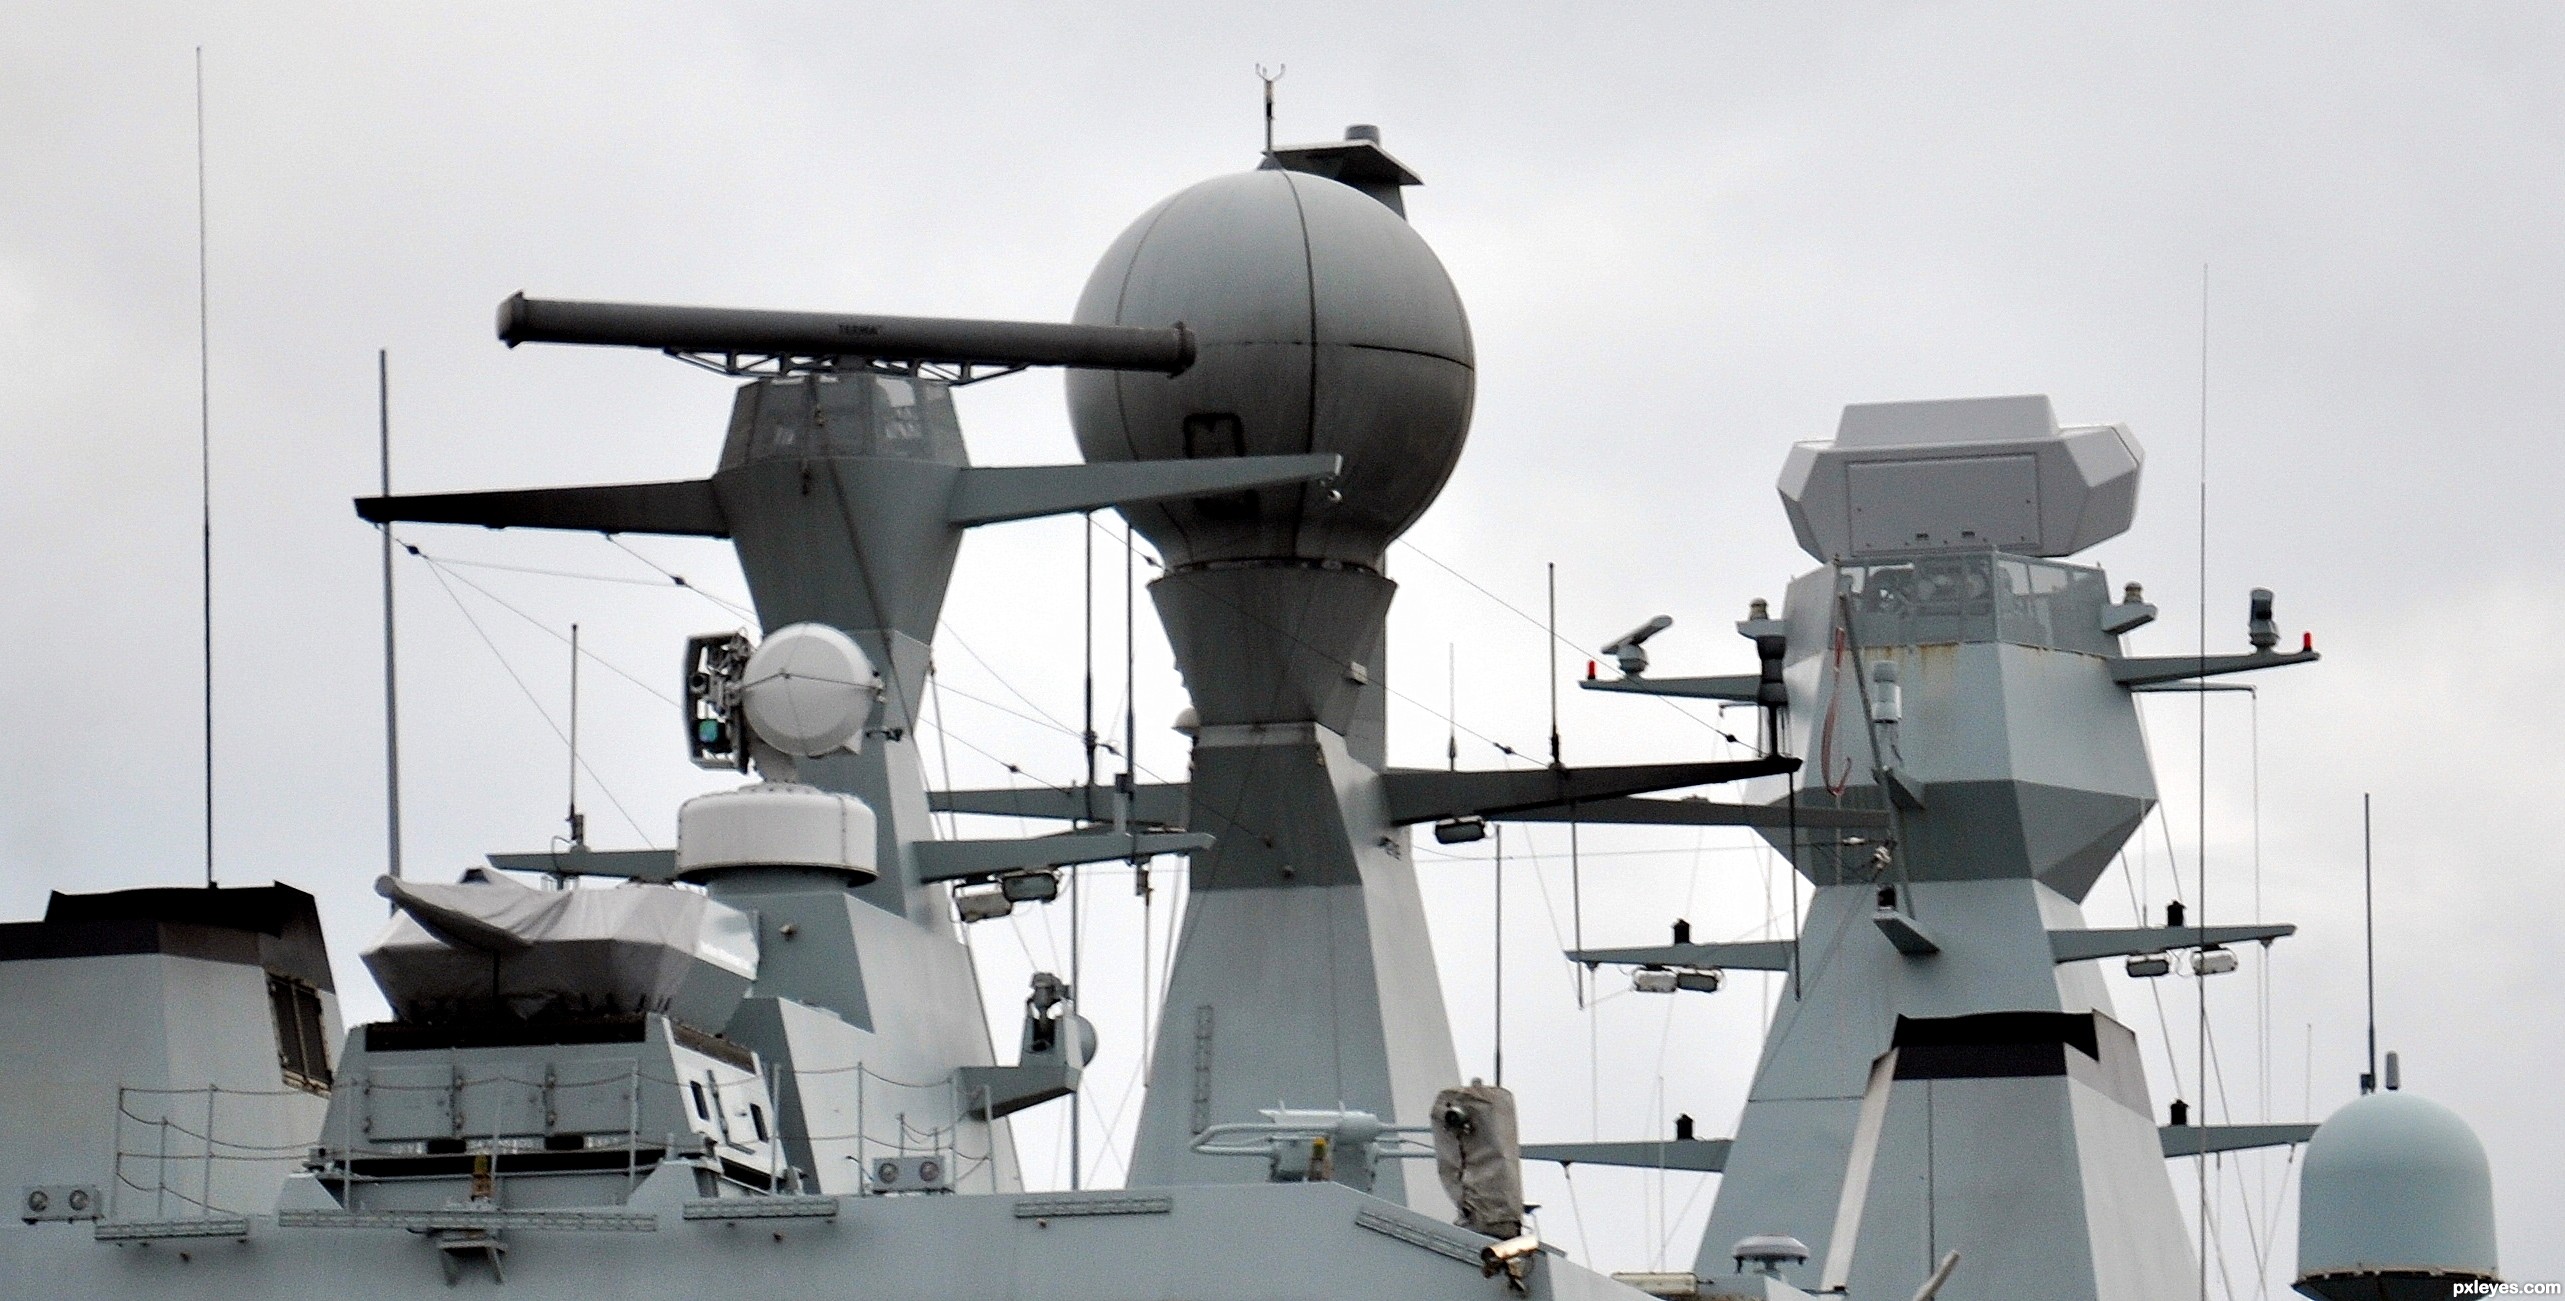 Navy Antennas picture, by Lefa for: antennas photography contest ...